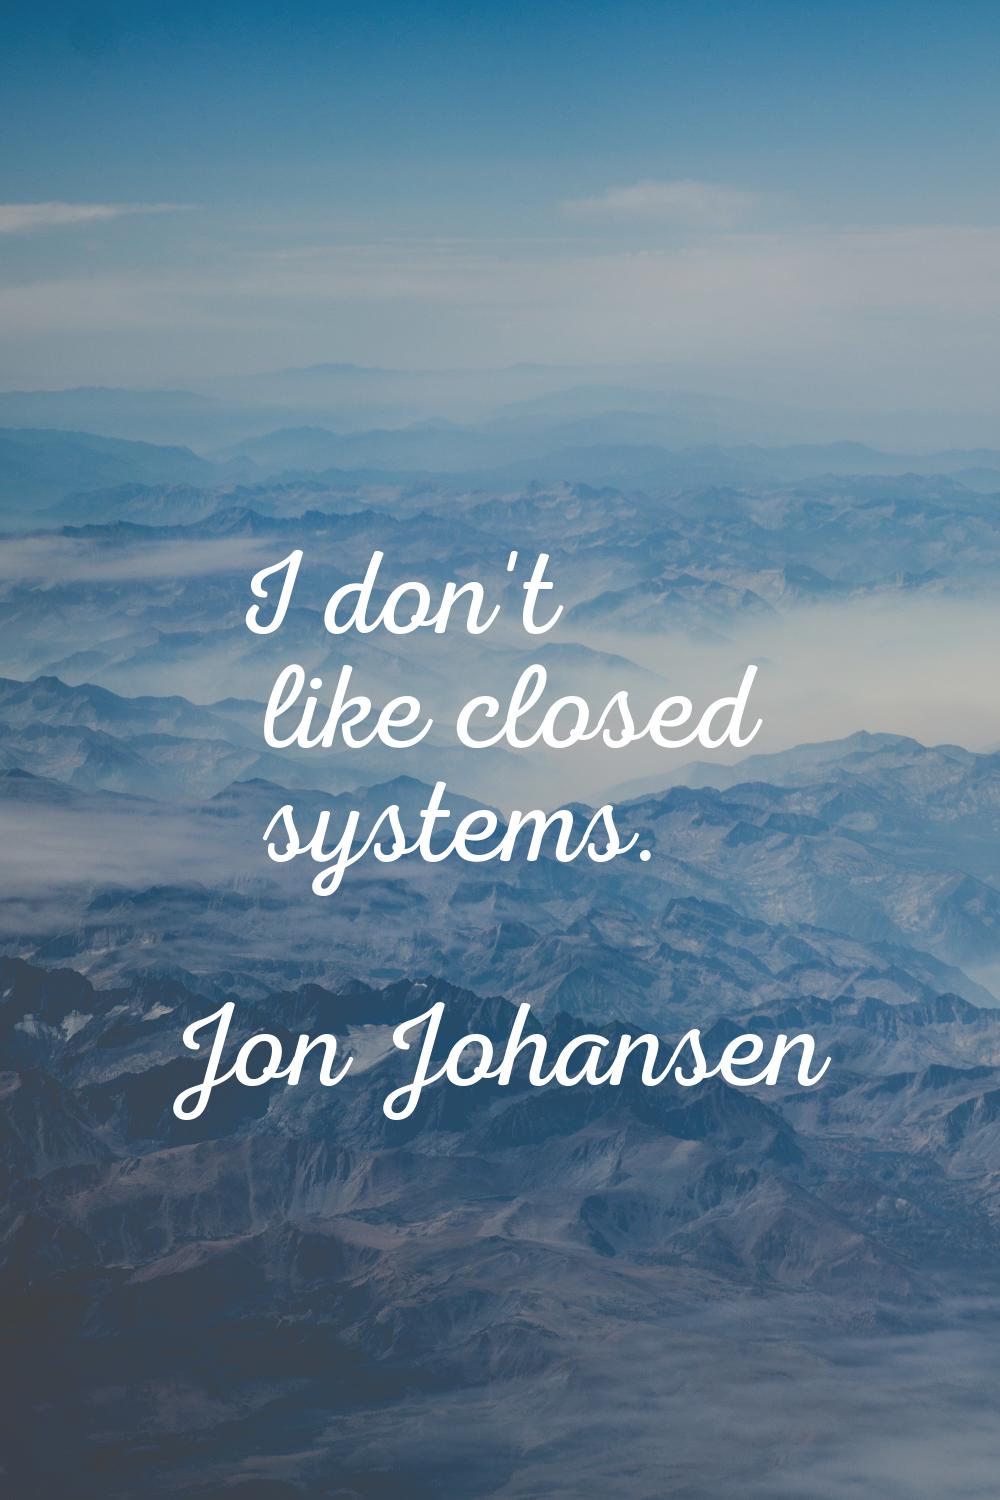 I don't like closed systems.